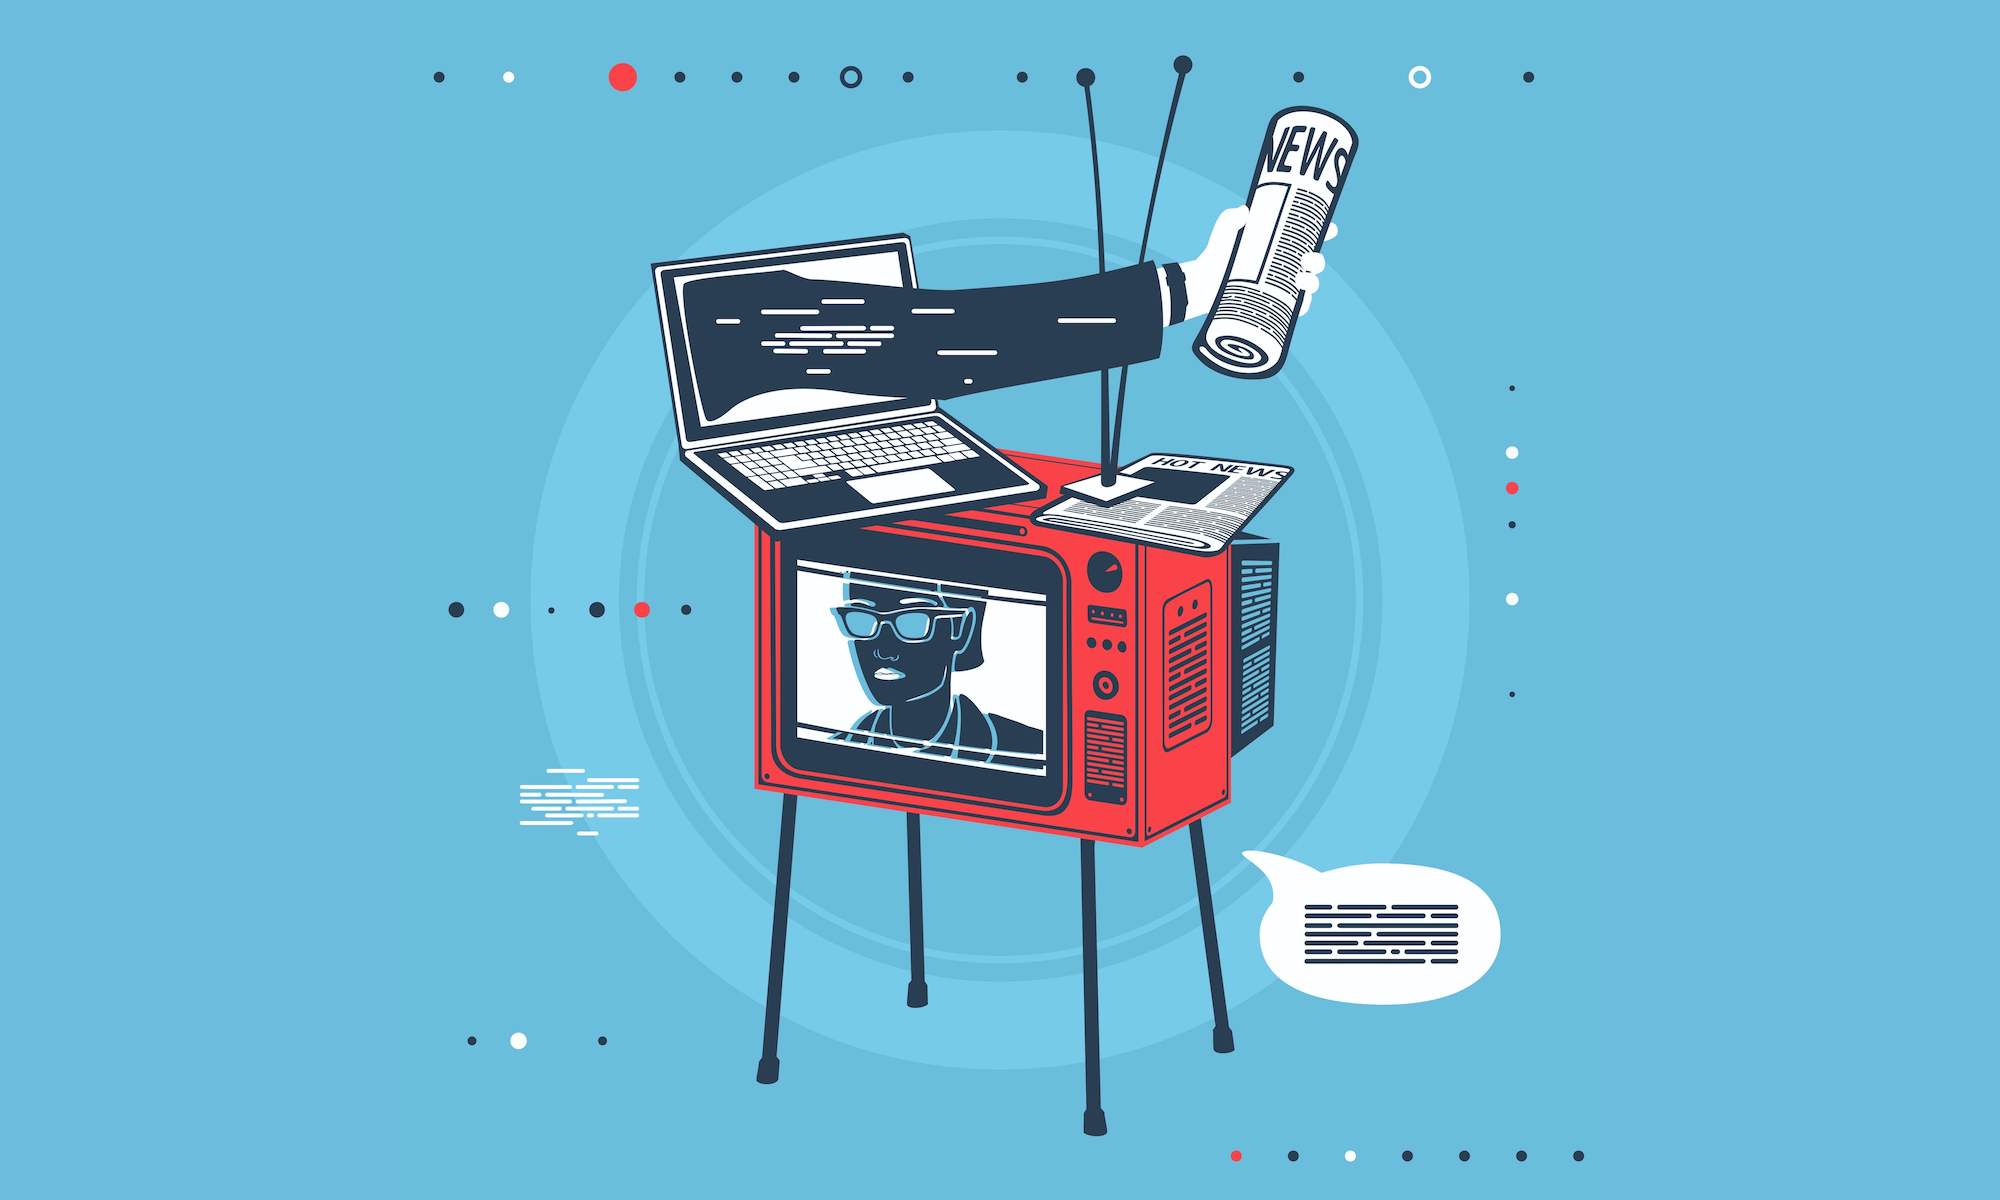 An illustration of an old television with a person in sunglasses on it. On top sits a laptop computer with an arm reaching out past the screen, holding a rolled up newspaper. Another newspaper lays flat on top of the screen.